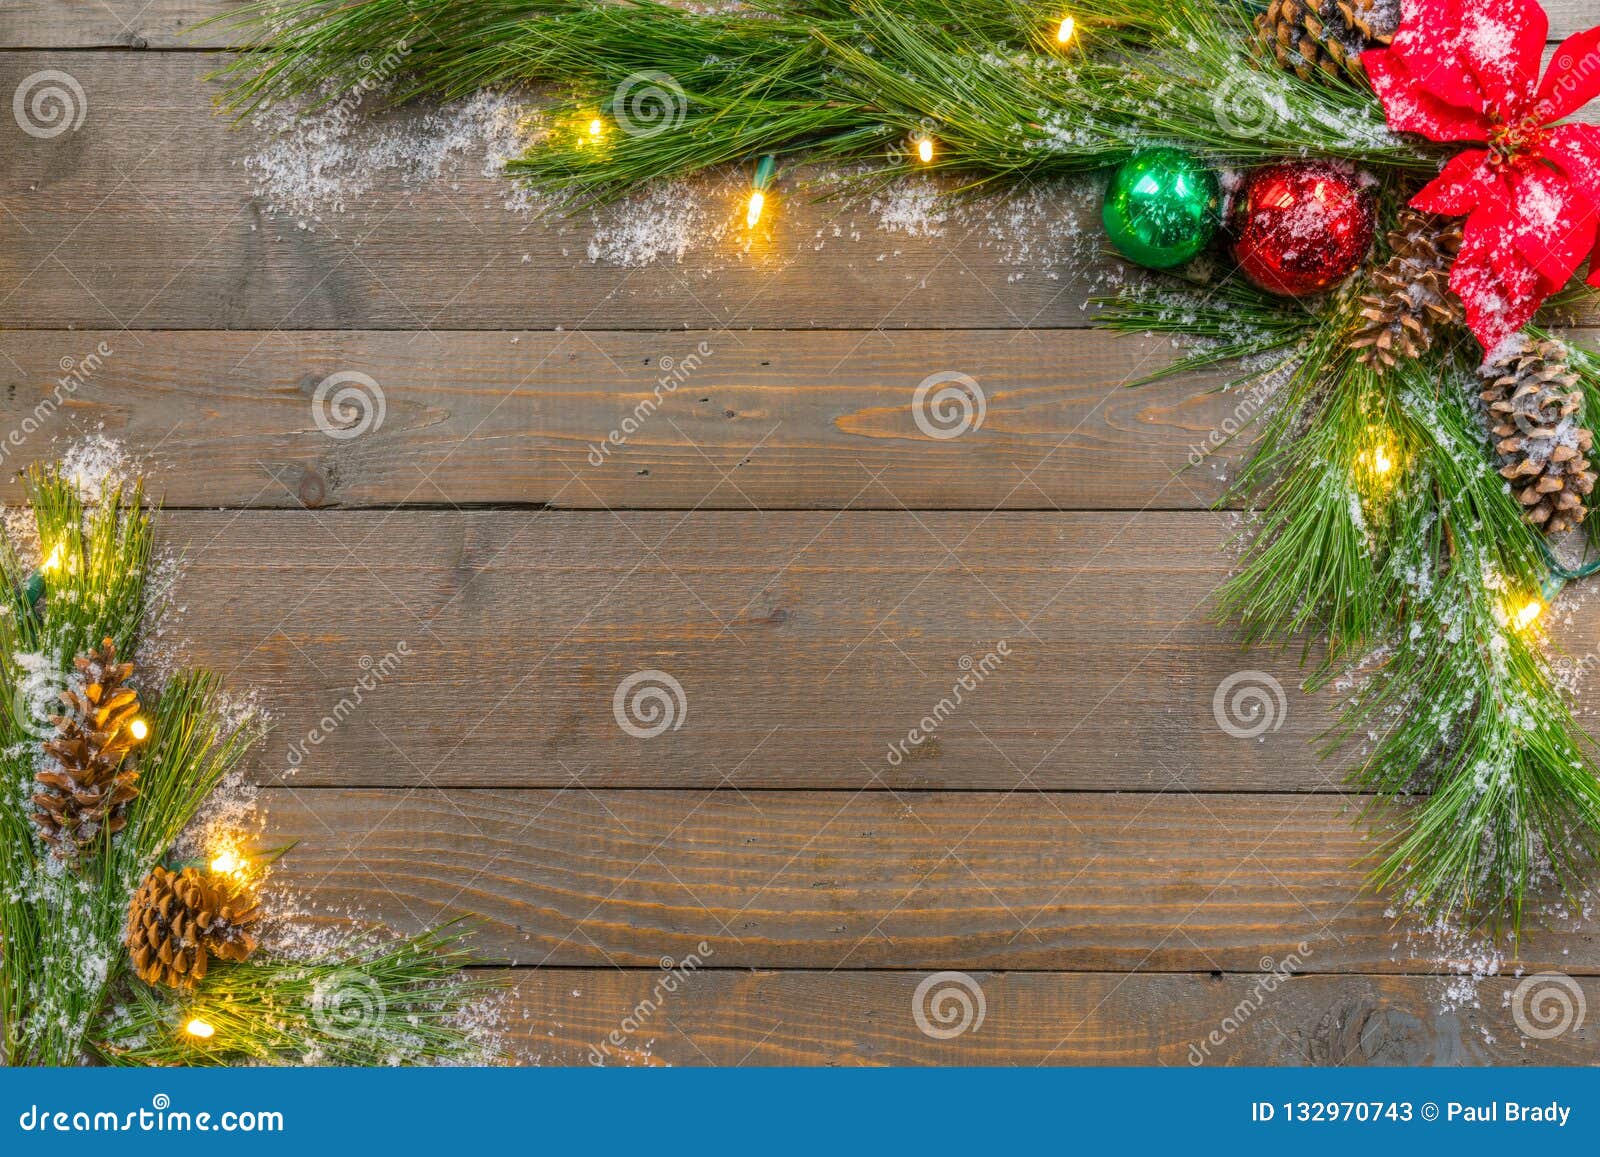 Christmas Background with Spruce Greens, Snow, Ornaments and Lights ...